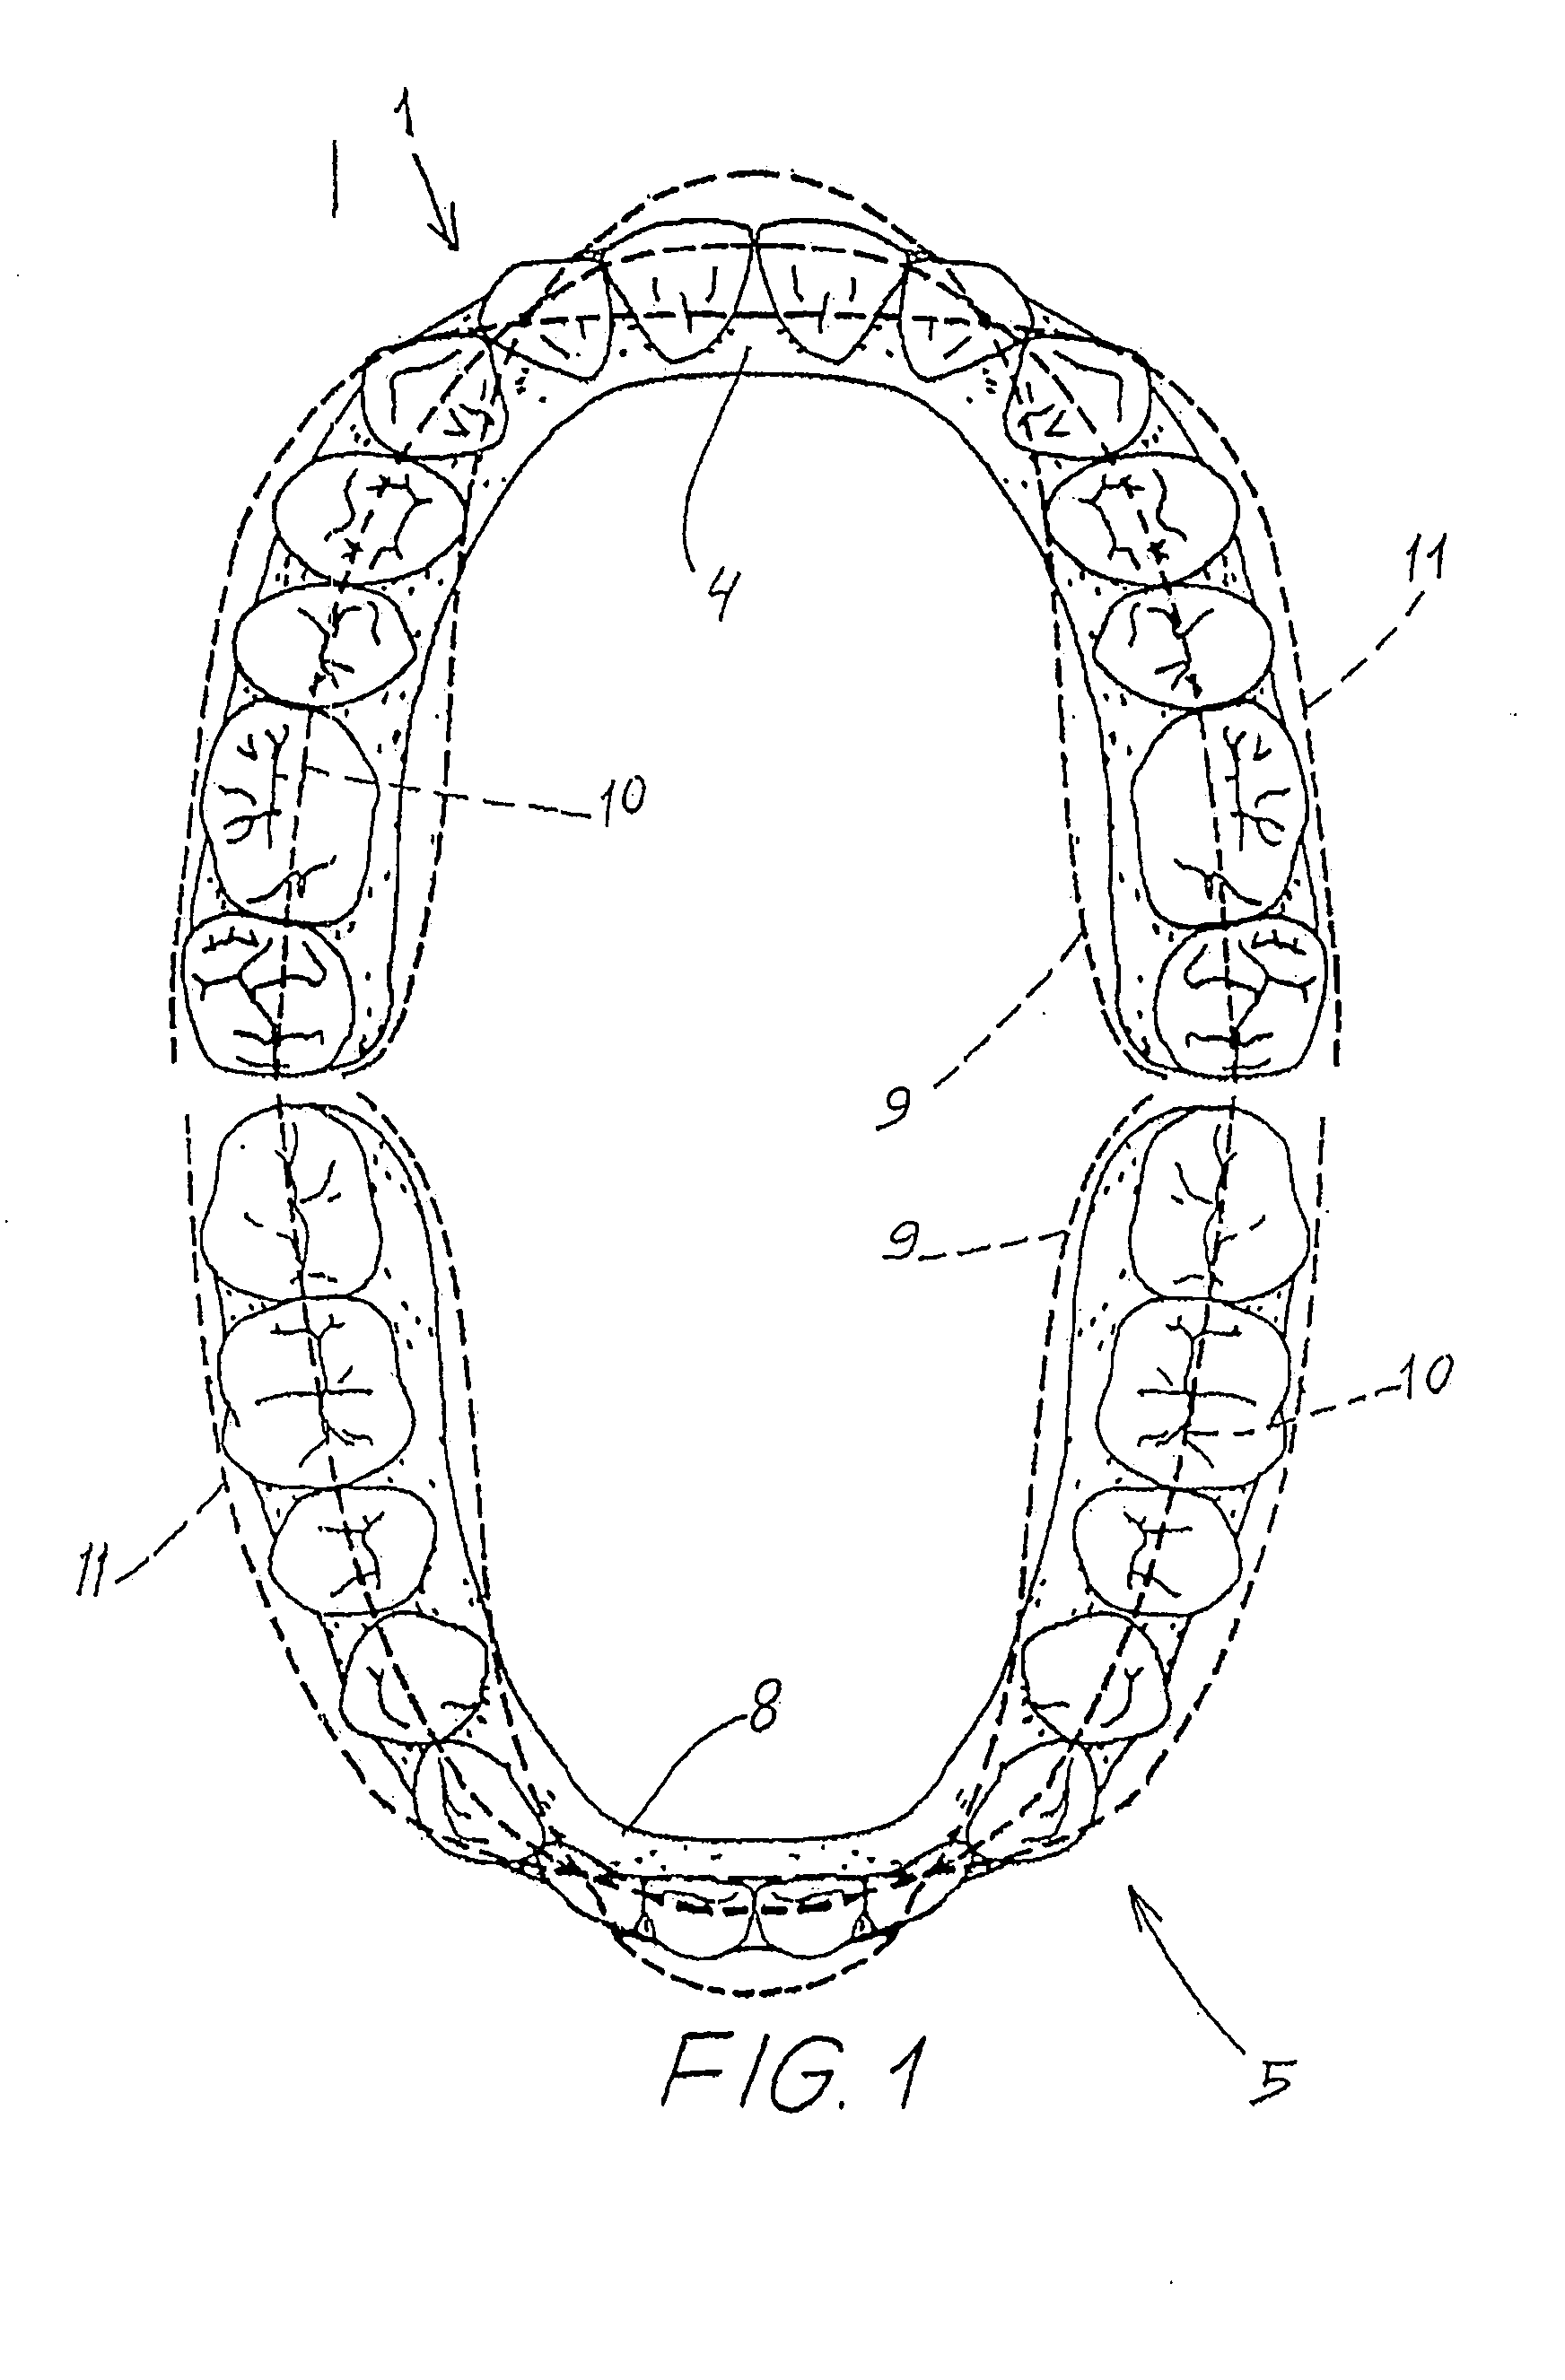 Set of prefabricated and flexible dental arches with adjustable teeth, dental arches kit, denture construction process and method of application of said arches in the denture construction process